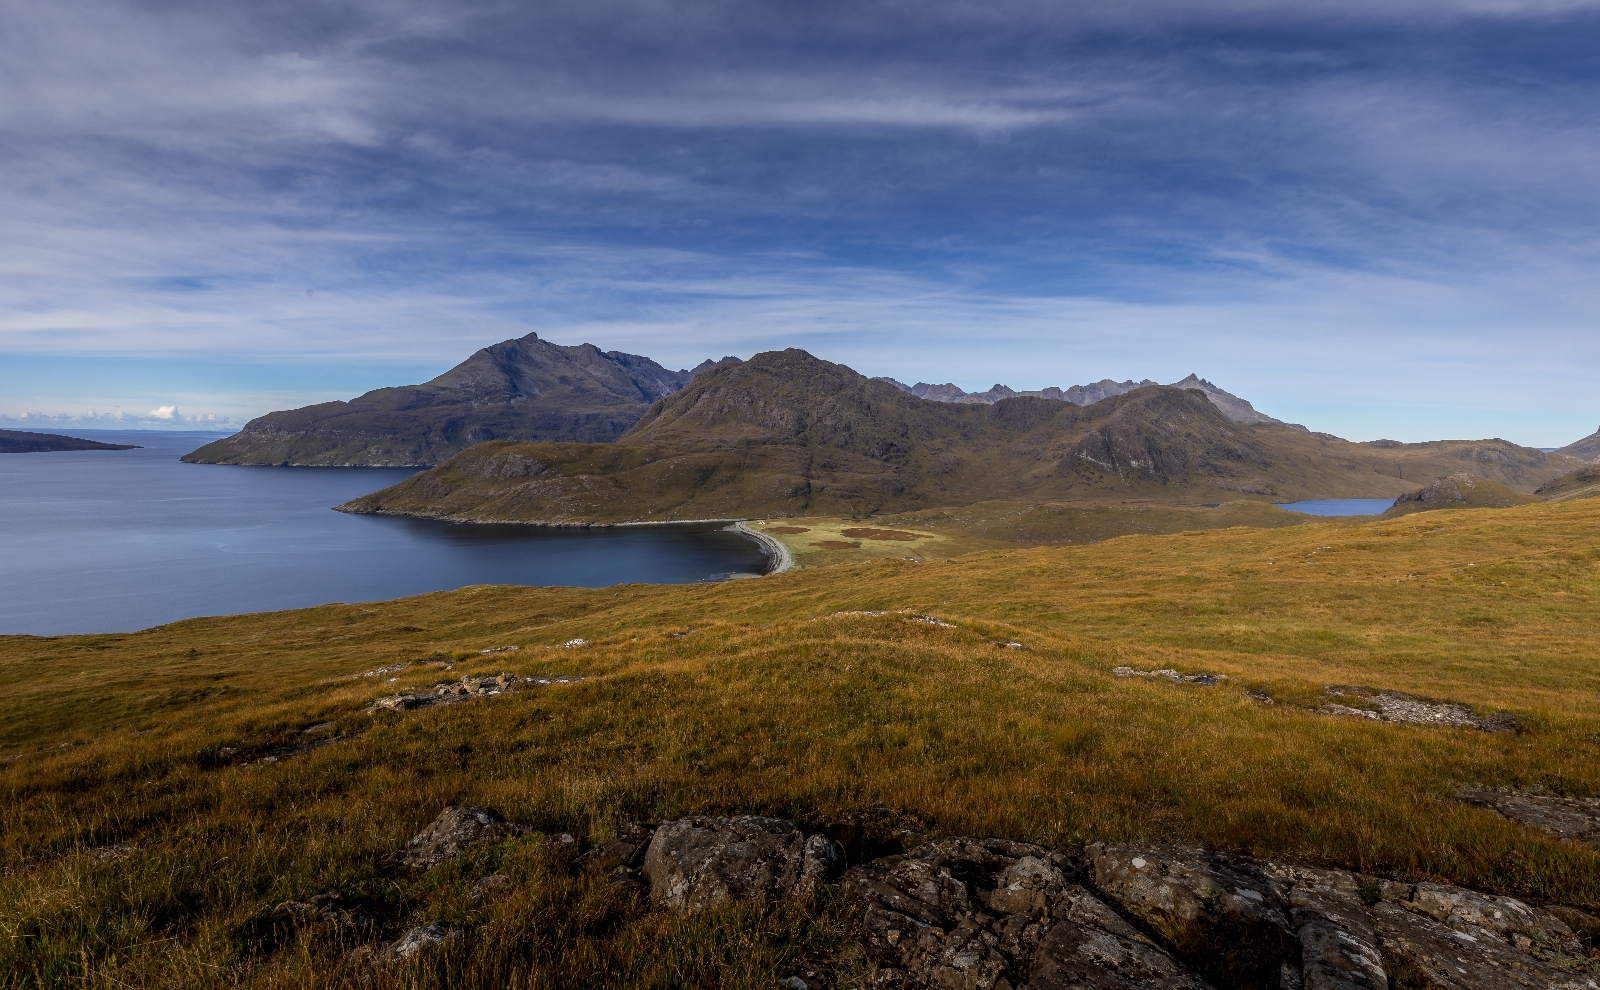 Image of Views of the Cuillin Range from the Camasunary Path by Alison Fairley